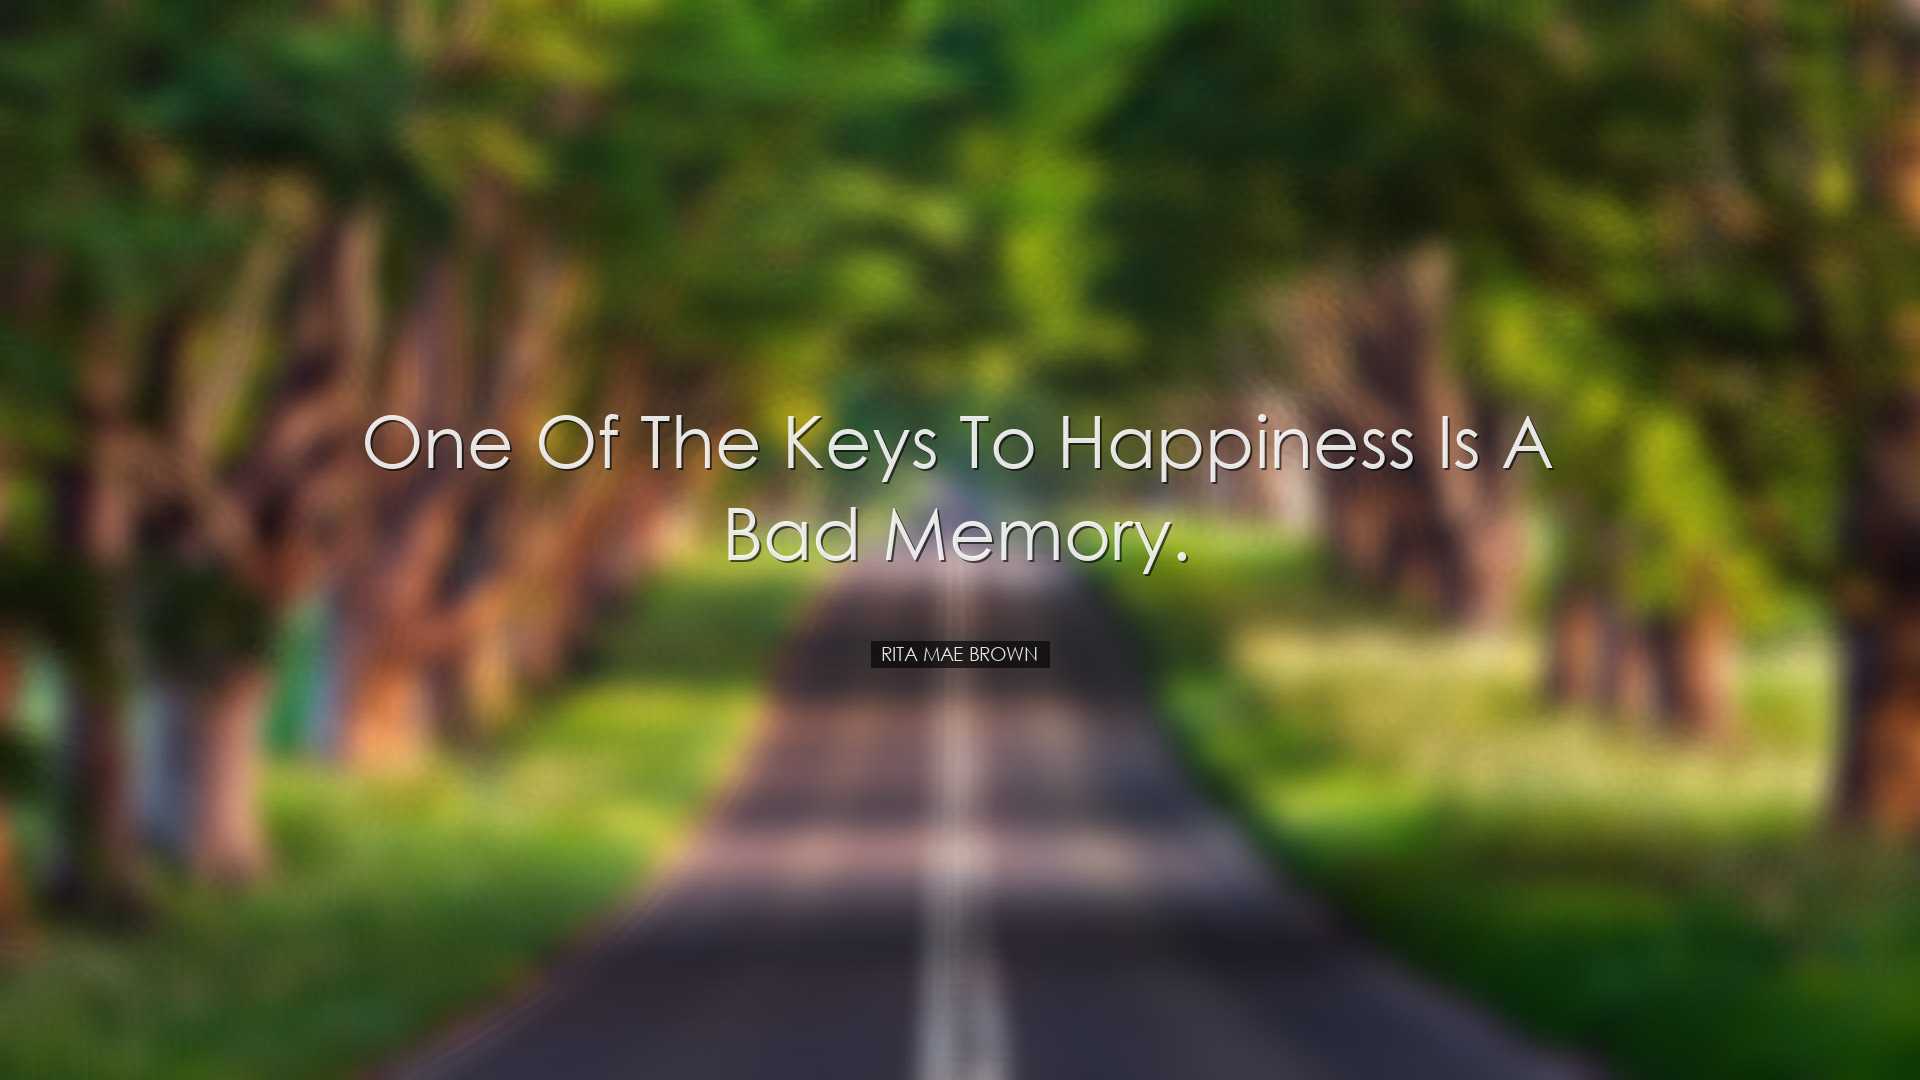 One of the keys to happiness is a bad memory. - Rita Mae Brown